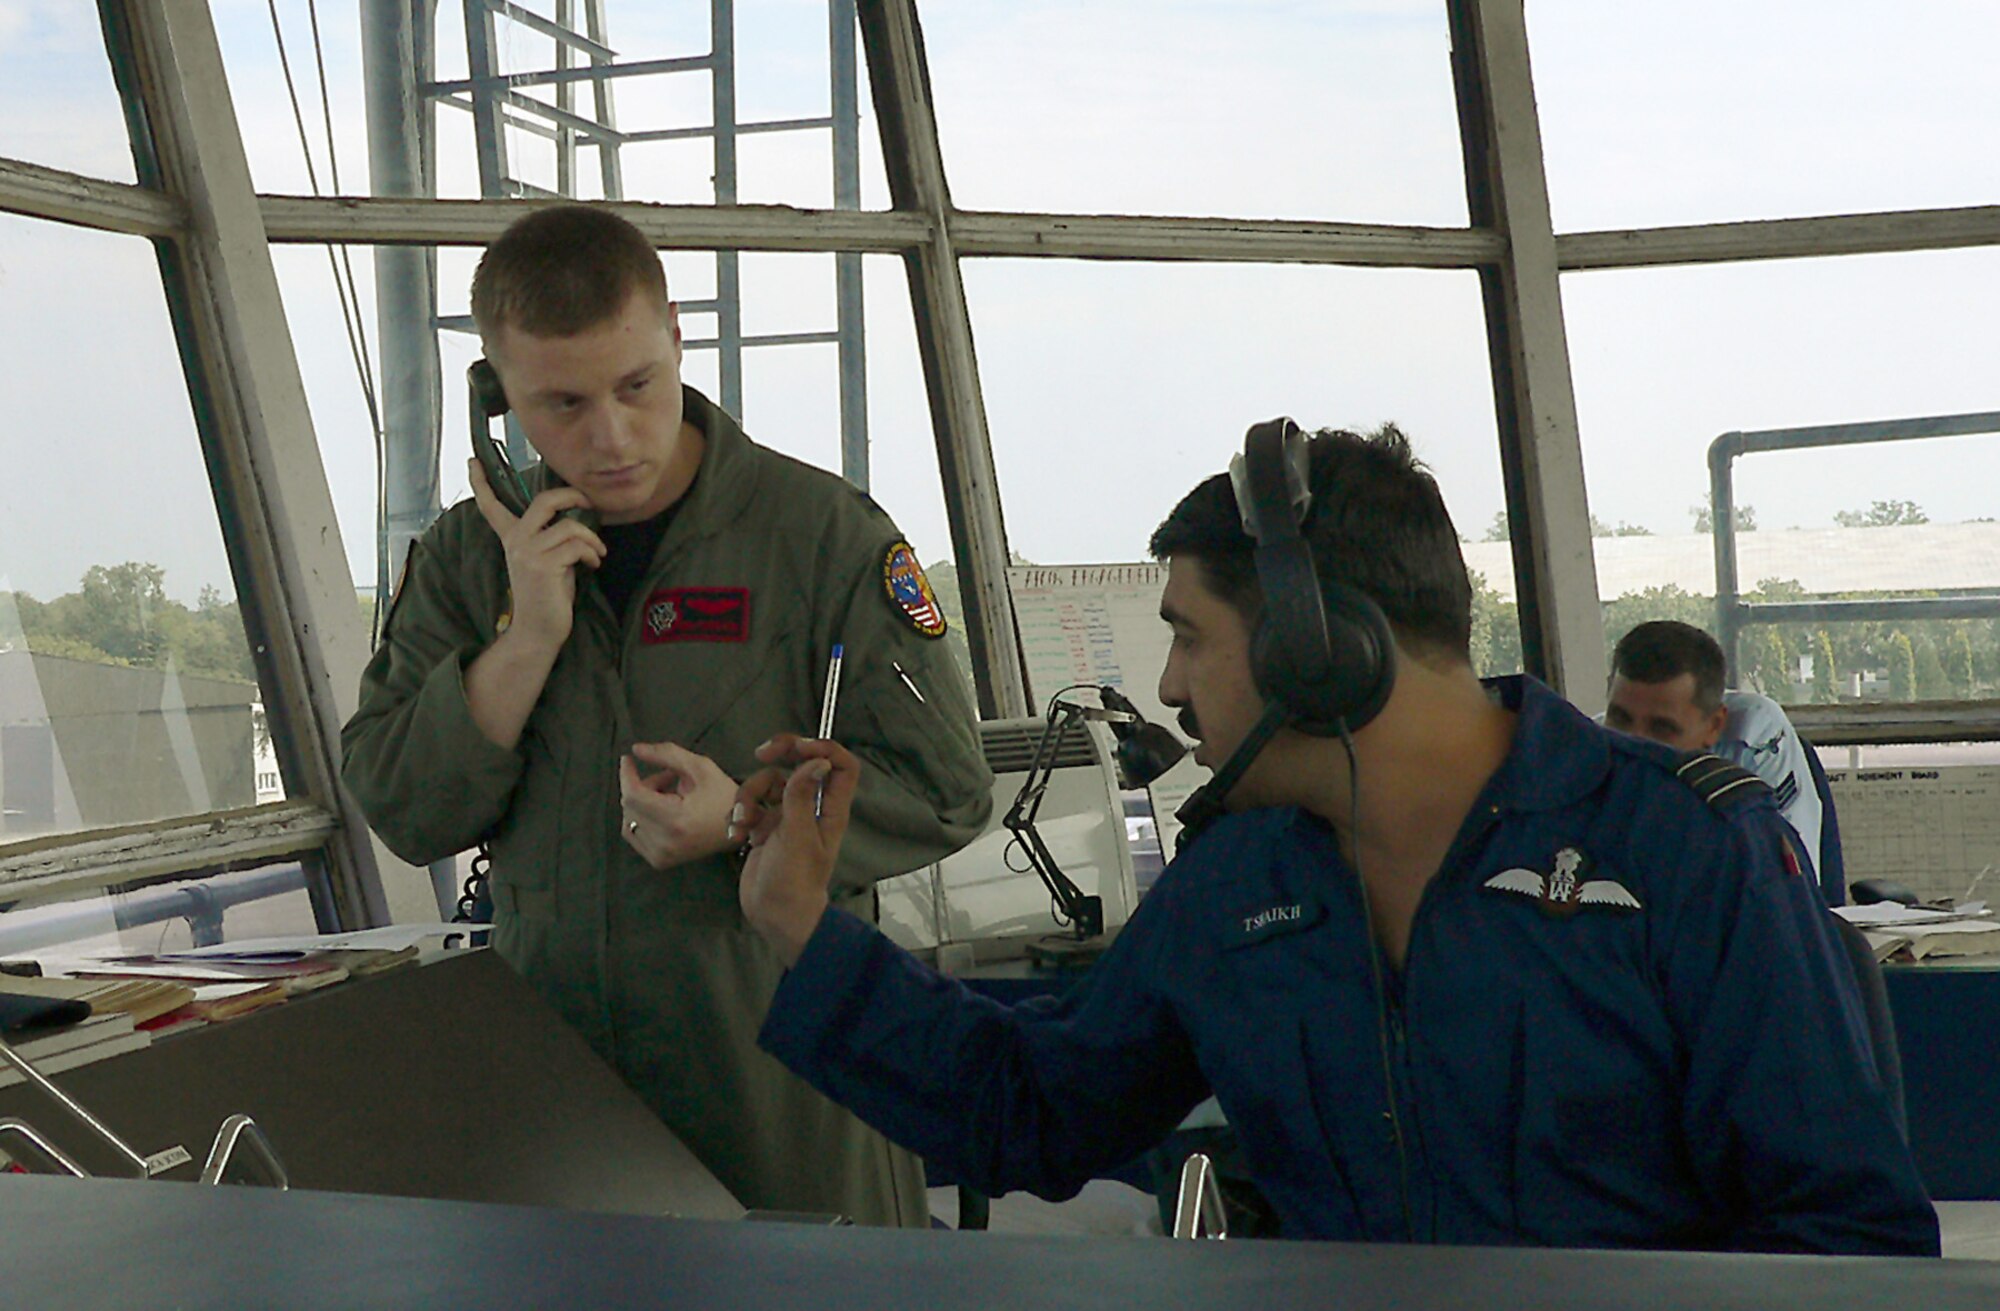 KALAIKUNDA AIR STATION, India (AFPN) -- Capt. Benjamin Freeborn and Indian Air Force Squadron Leader Tahir Shaikh discuss the order in which aircraft return to base following sorties during the Cope India exercise here. Captain Freeborn works in the air traffic control tower as the supervisor of flying for American Airmen. Squadron Leader Shaikh is the senior launch coordinator for Indian Airmen. Both deployed here for Cope India 06, which began Nov. 7. The exercise will enhance interoperability between the two air forces. (U.S. Air Force photo by Capt. John Redfield)